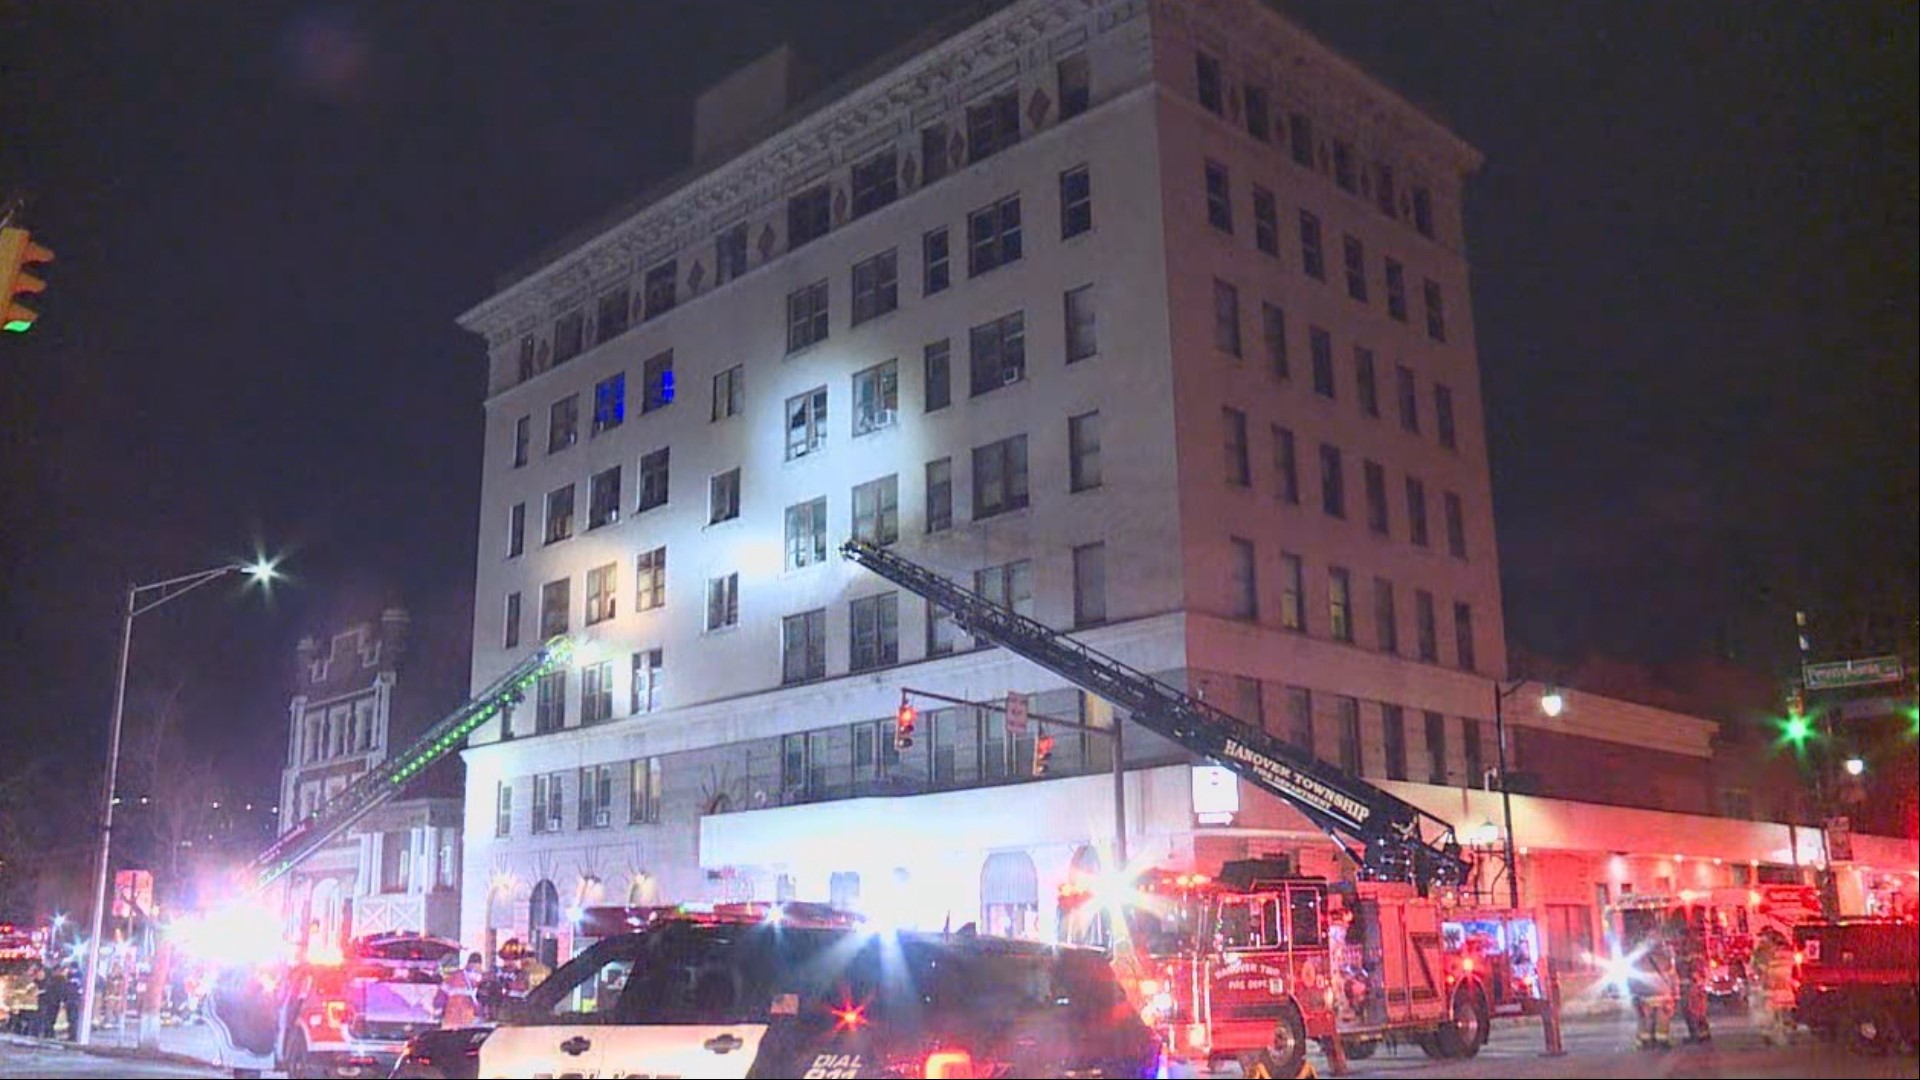 At least one person died when flames broke out at a hotel complex in downtown Wilkes-Barre early Tuesday morning.